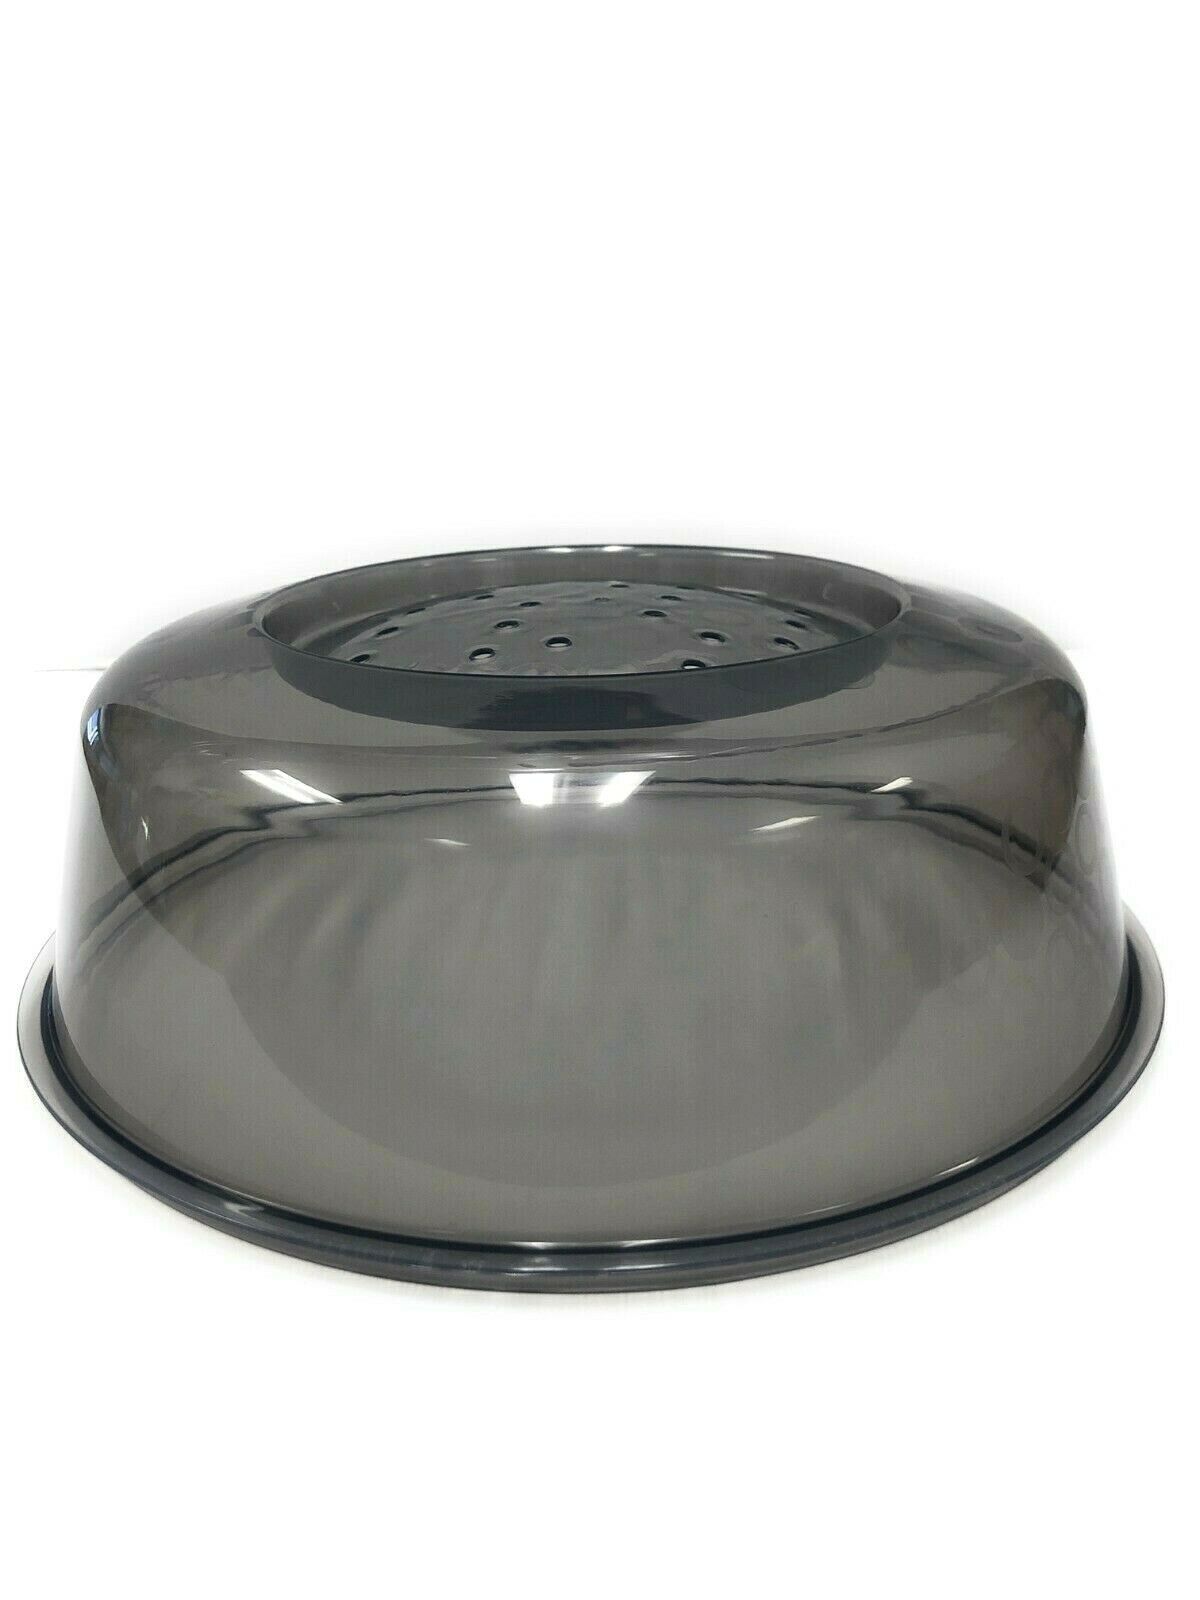 10.75" Microwave Safe Dish Plate Food Plastic Lid Cover Splatter With Vents